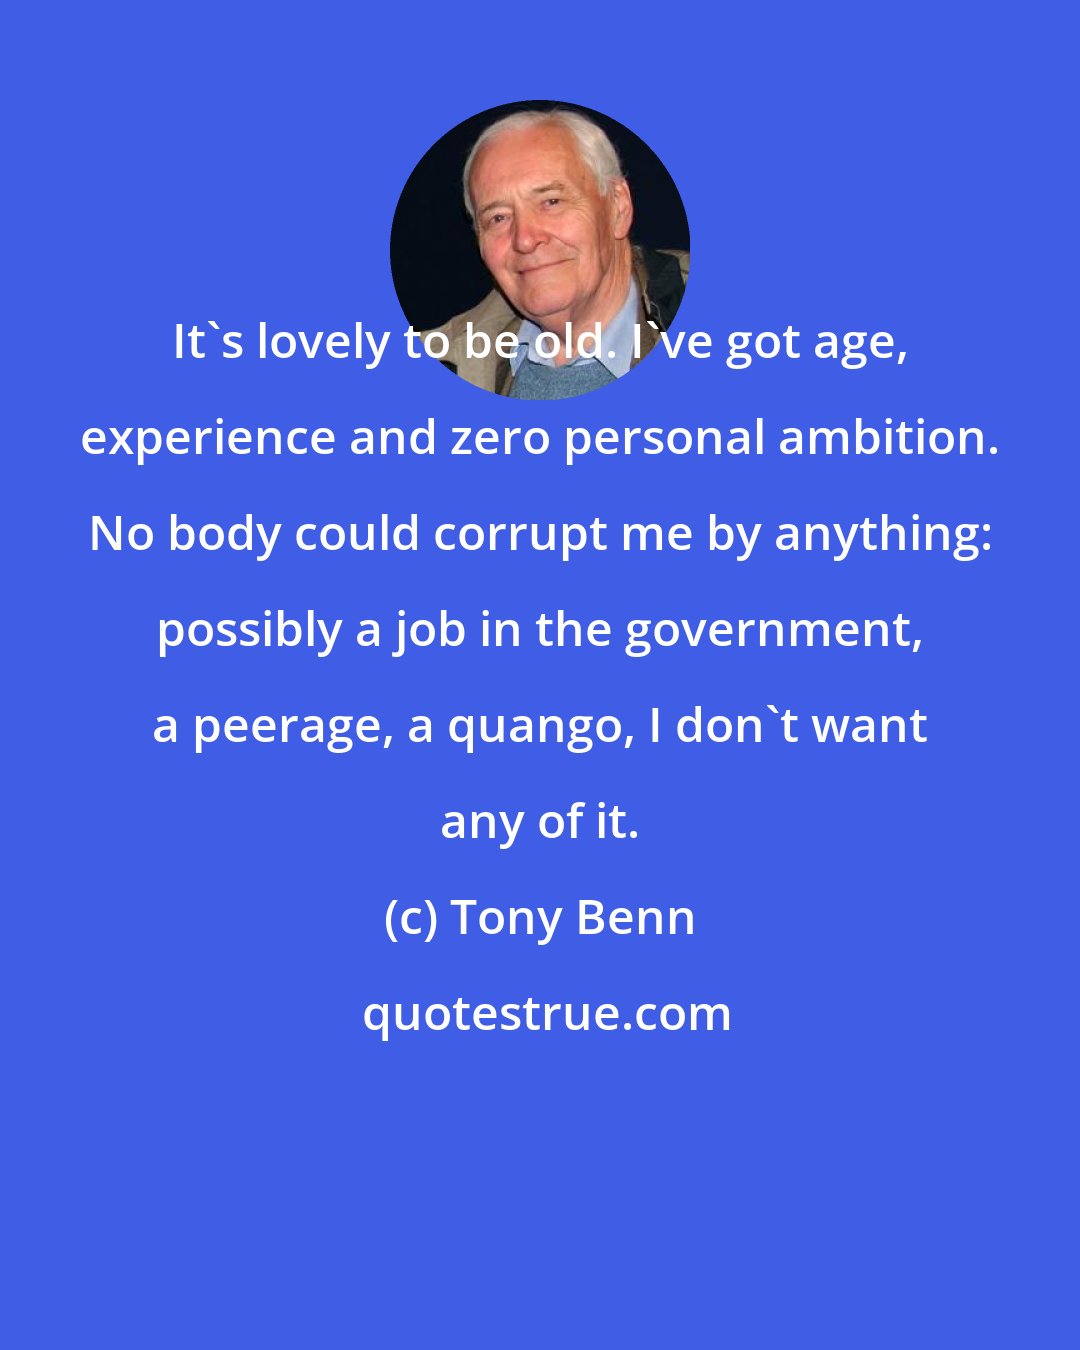 Tony Benn: It's lovely to be old. I've got age, experience and zero personal ambition. No body could corrupt me by anything: possibly a job in the government, a peerage, a quango, I don't want any of it.